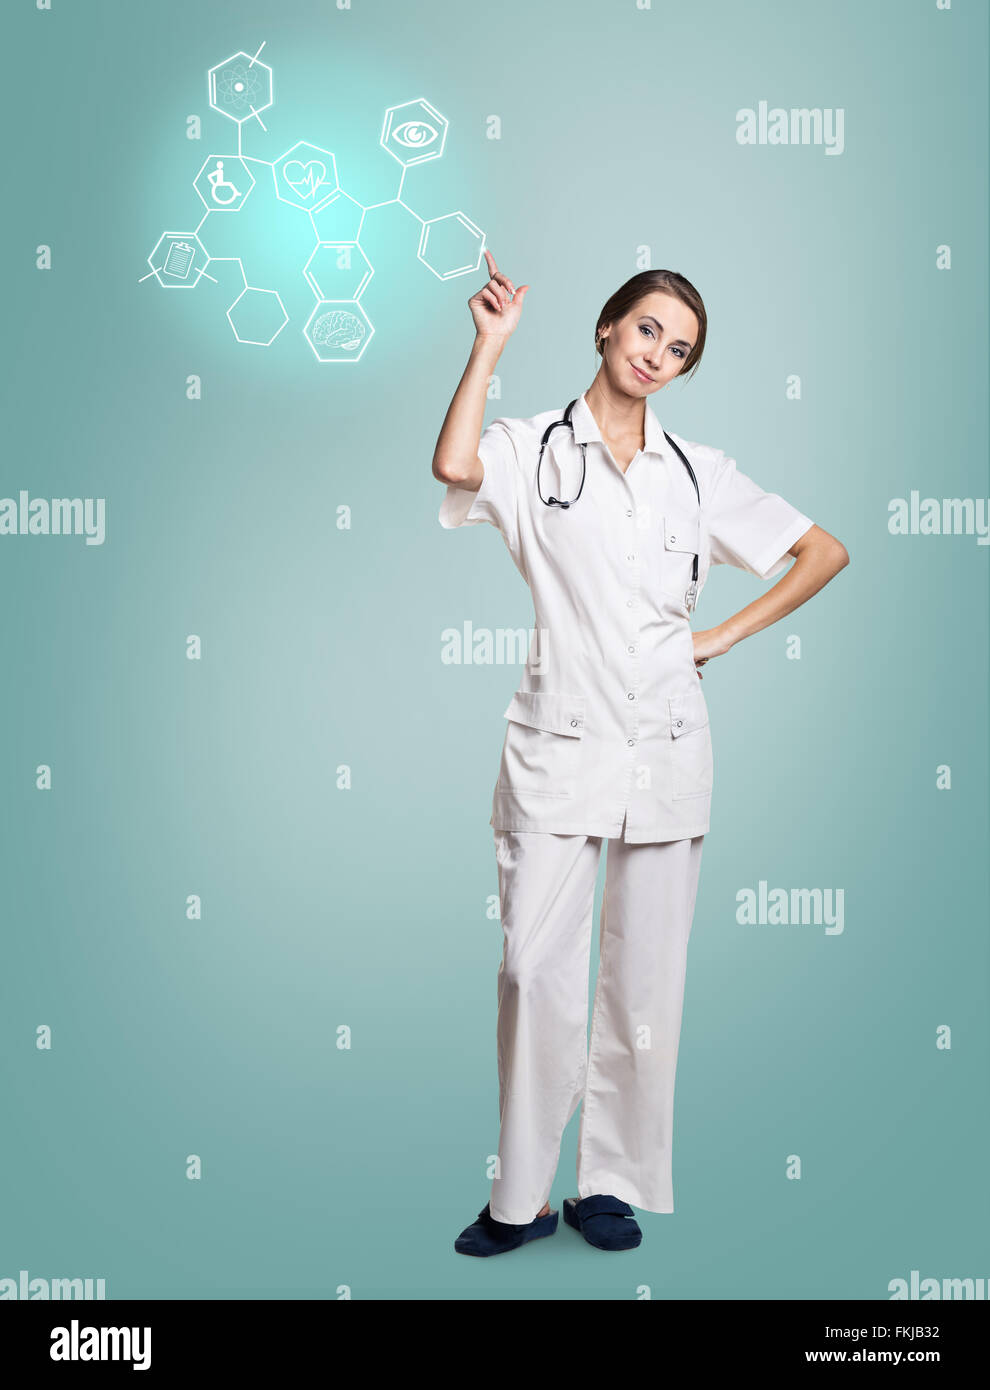 Female doctor in uniform touch hexagon with icons Stock Photo